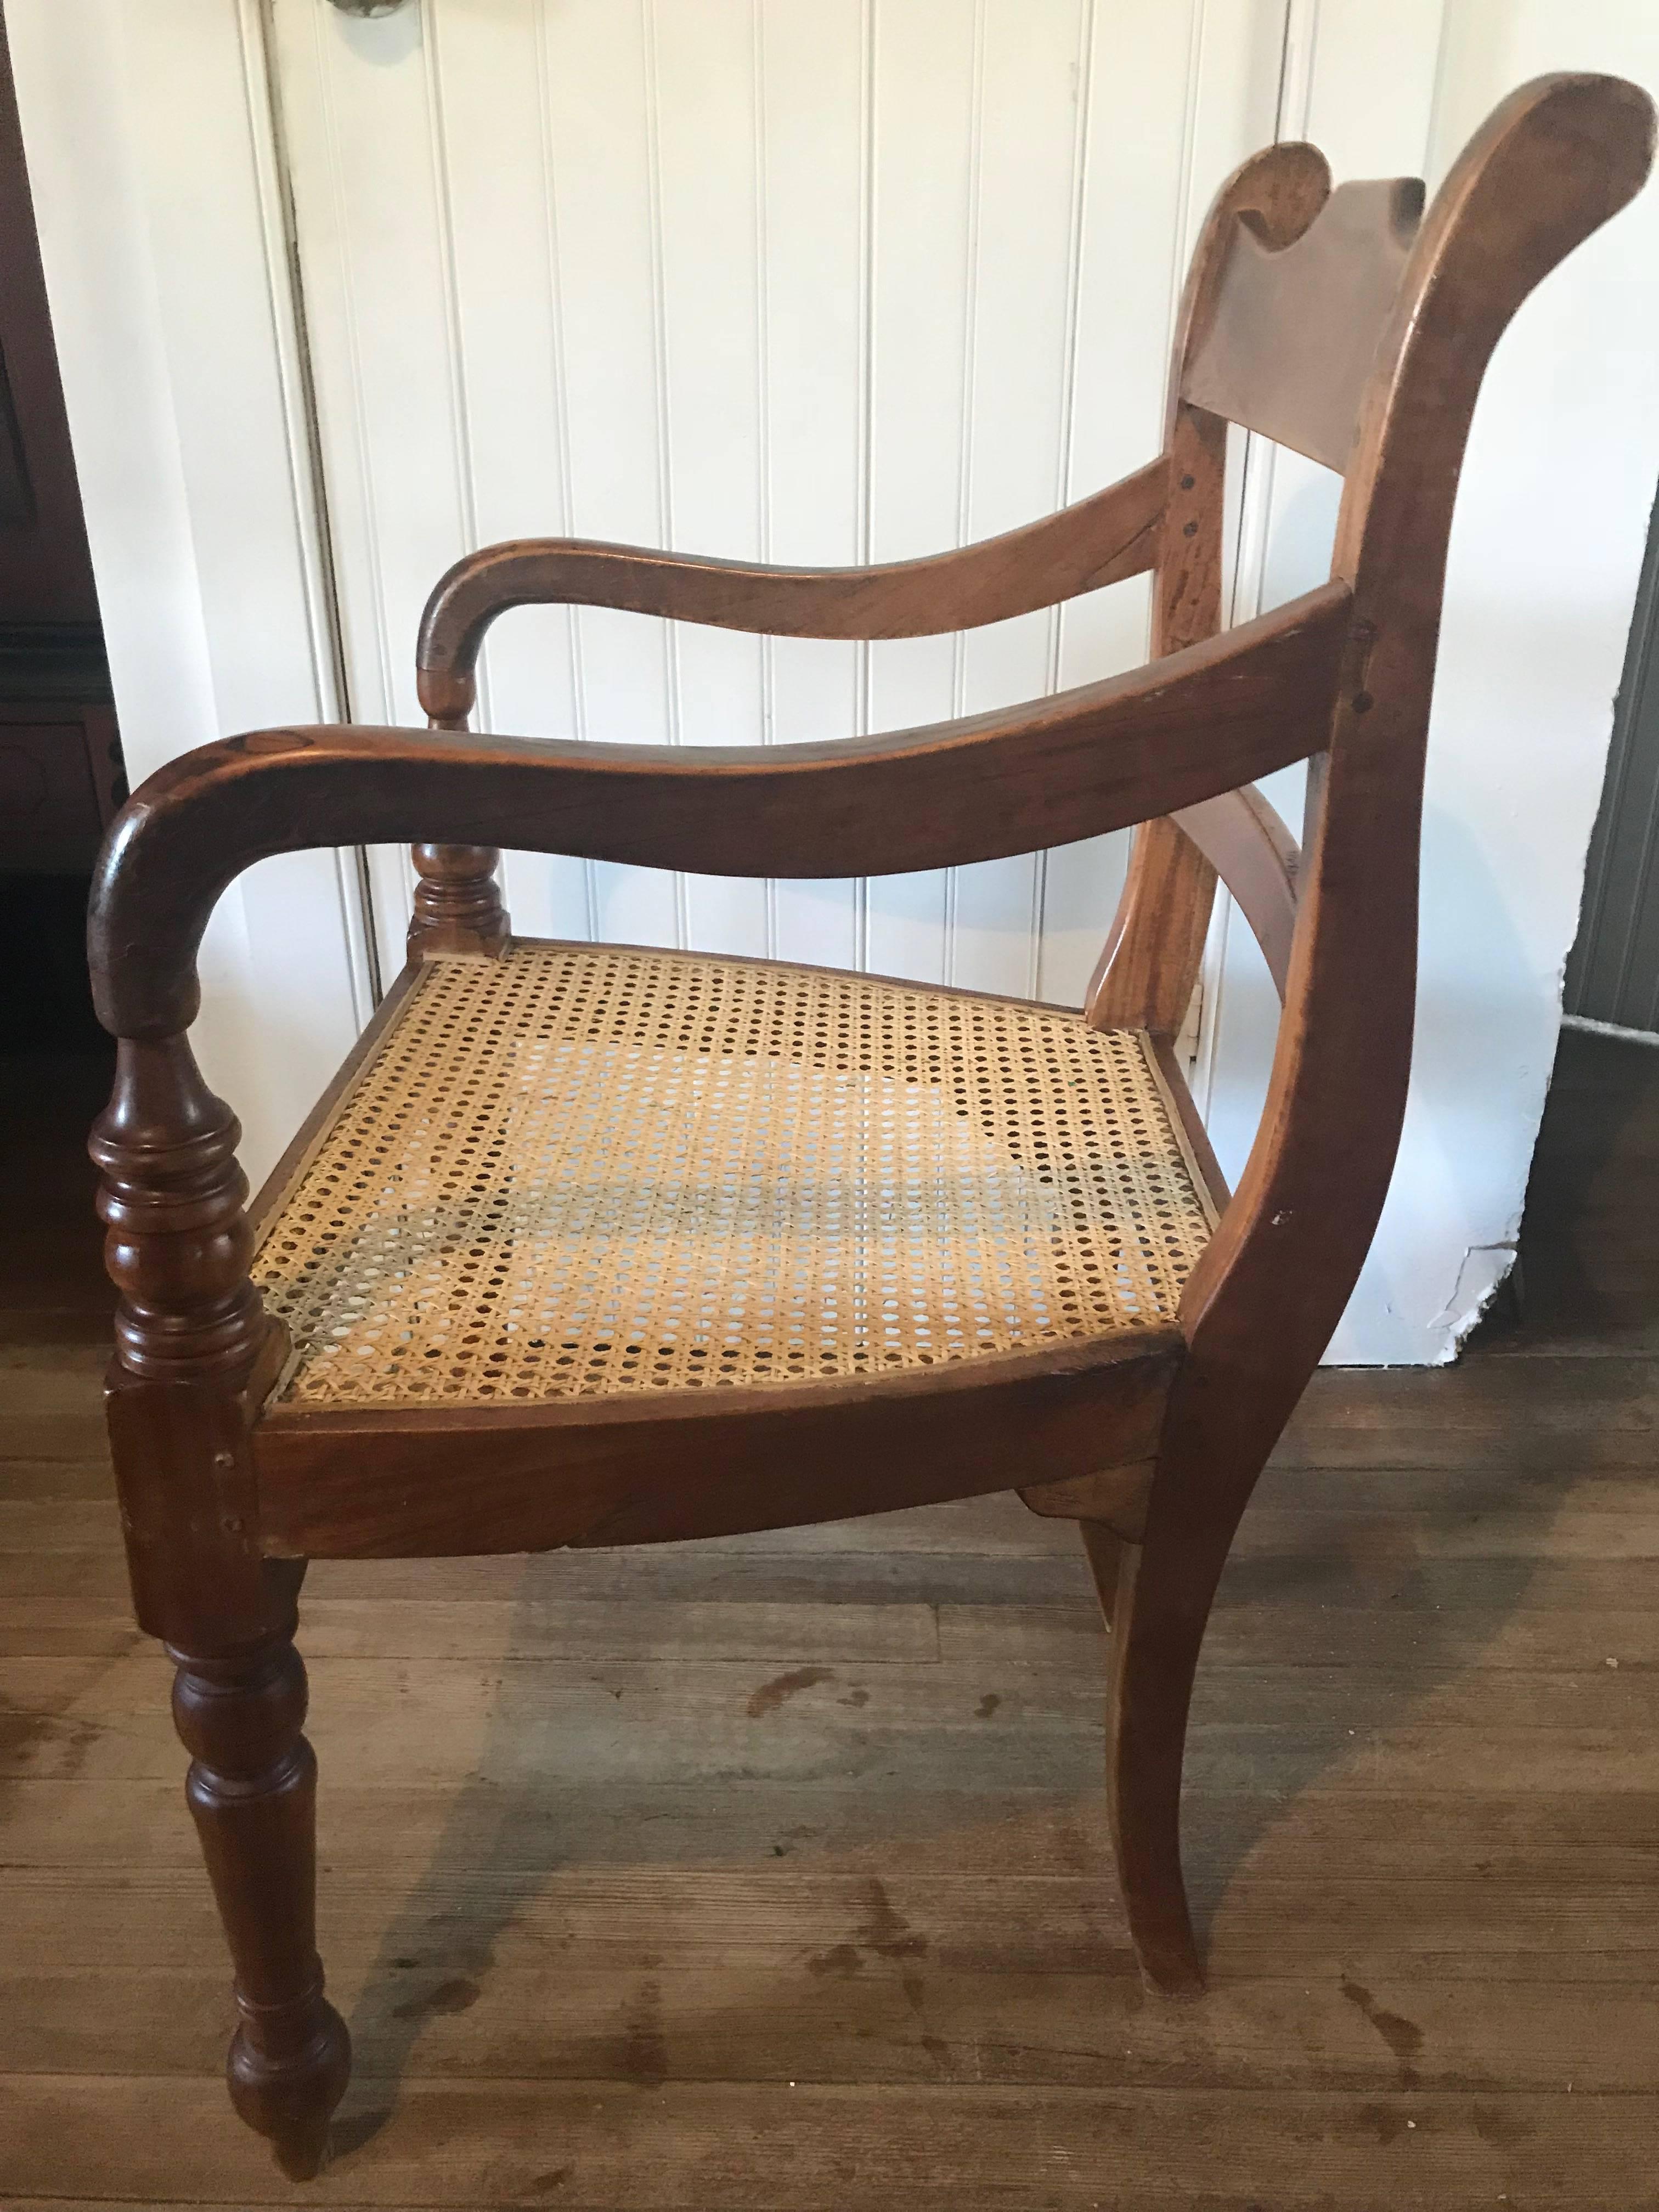 British Colonial, Ceylonese, solid satinwood caned armchair, circa 1900. Beautiful old peg construction, hand carving, and hand-caning. This piece is made from solid satinwood. It was imported in the 1980s from Sri Lanka. This was probably used as a